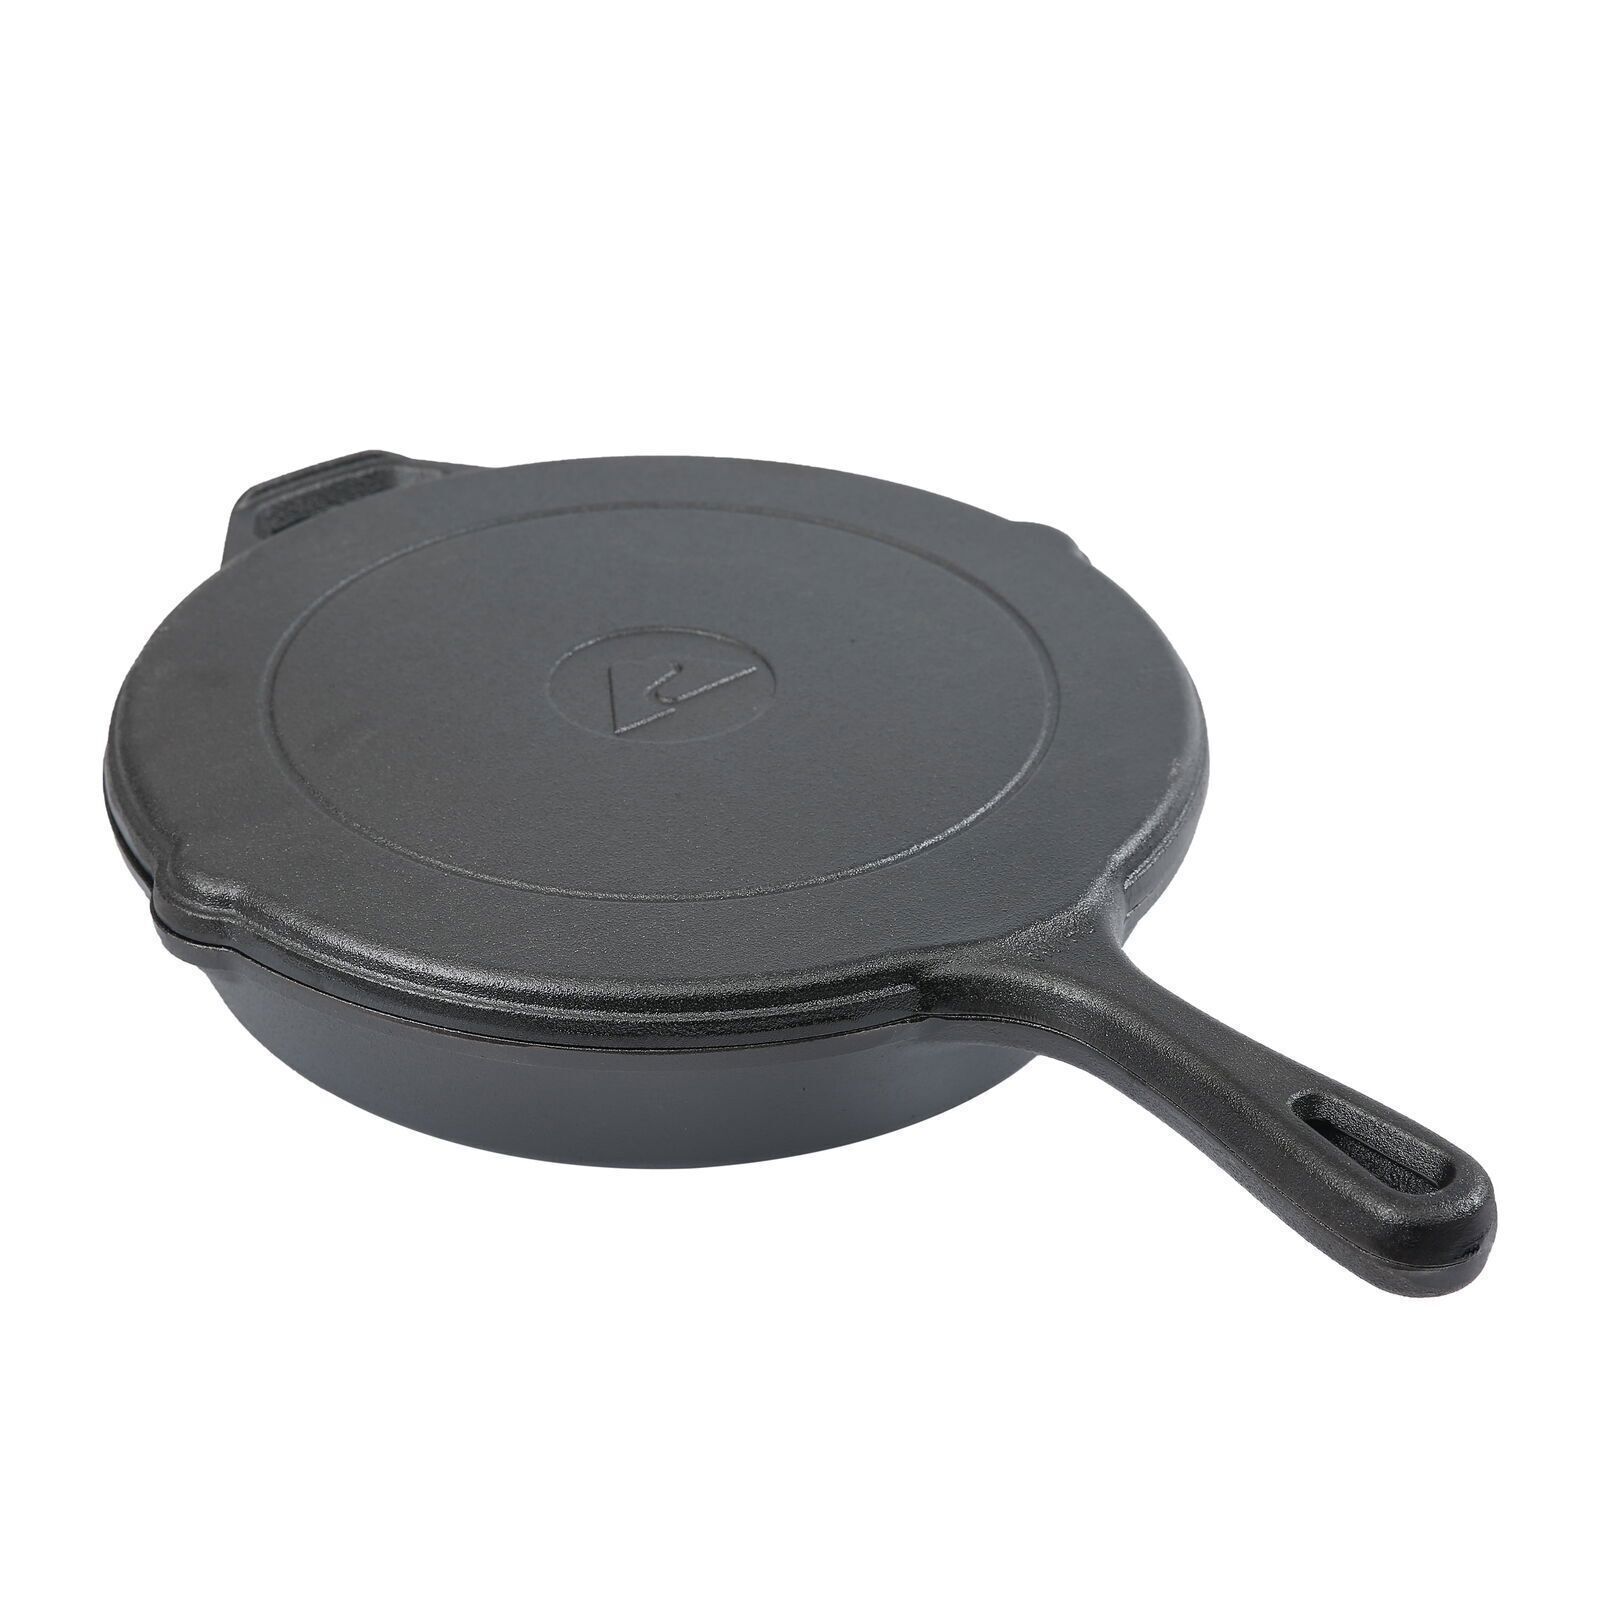 2 Piece 12 inch Cast Iron Skillet Set, Durable, For indoor and outdoor use US